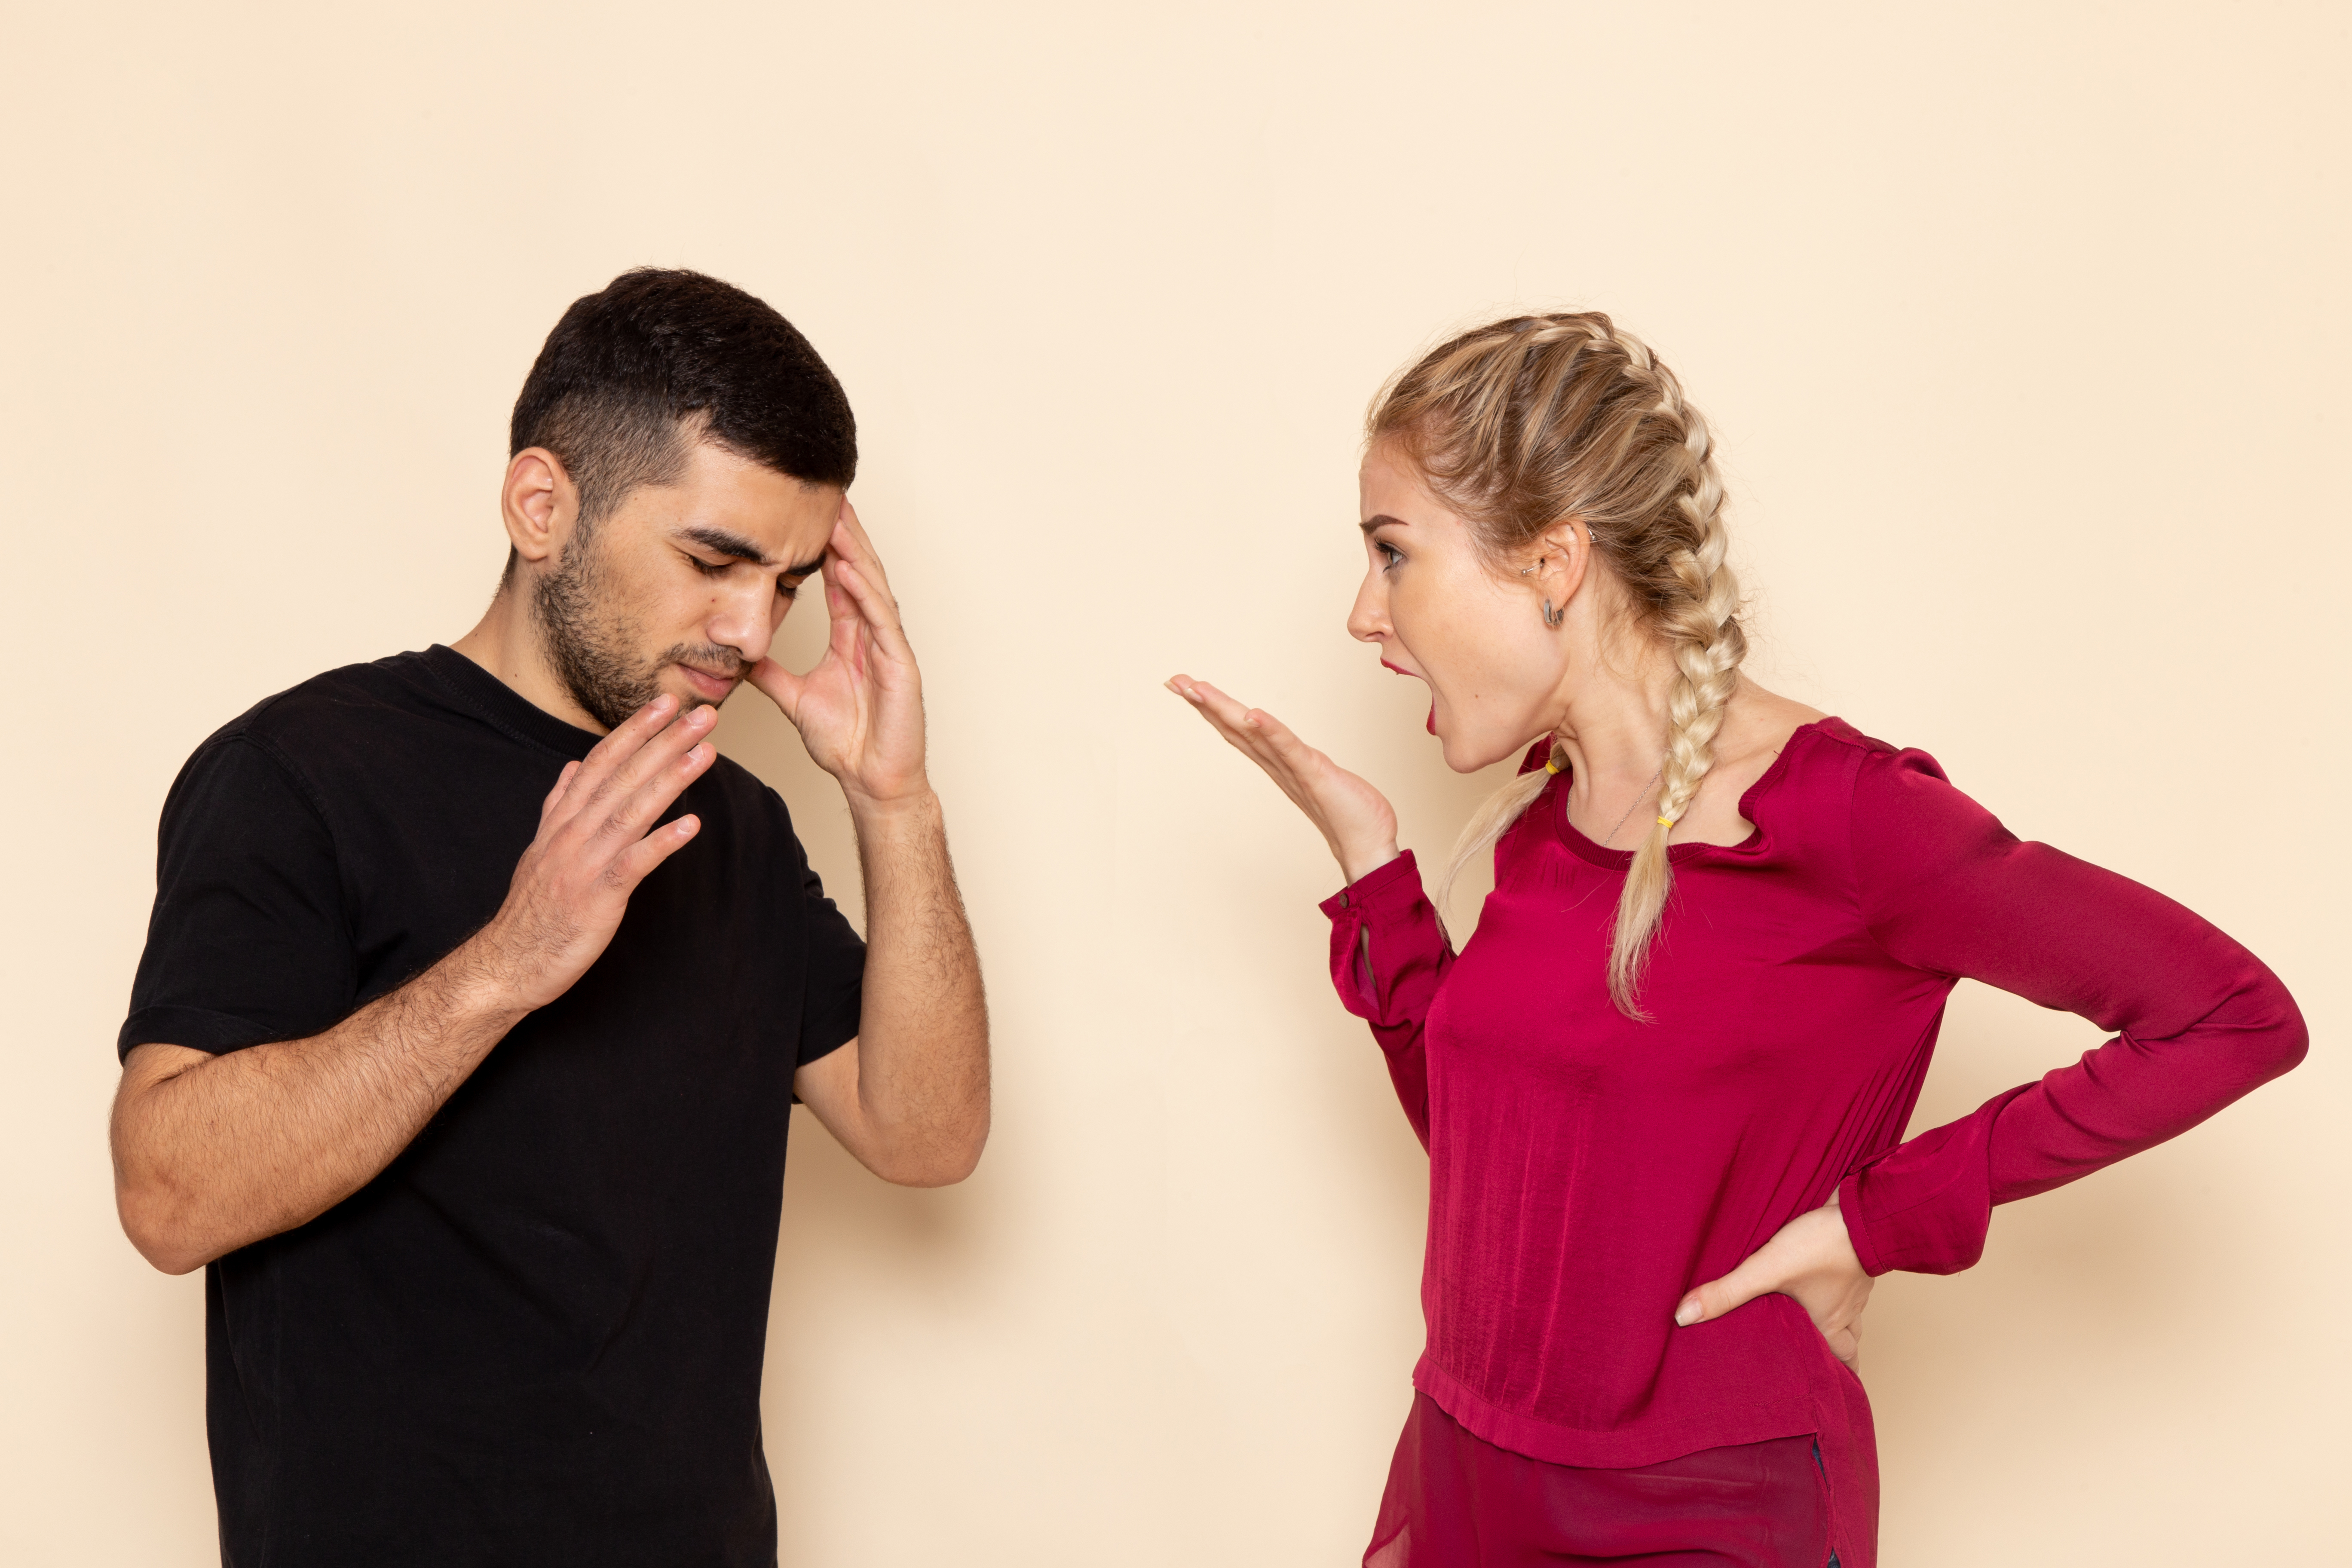 Woman gesturing to a man who looks confused | Source: Freepik